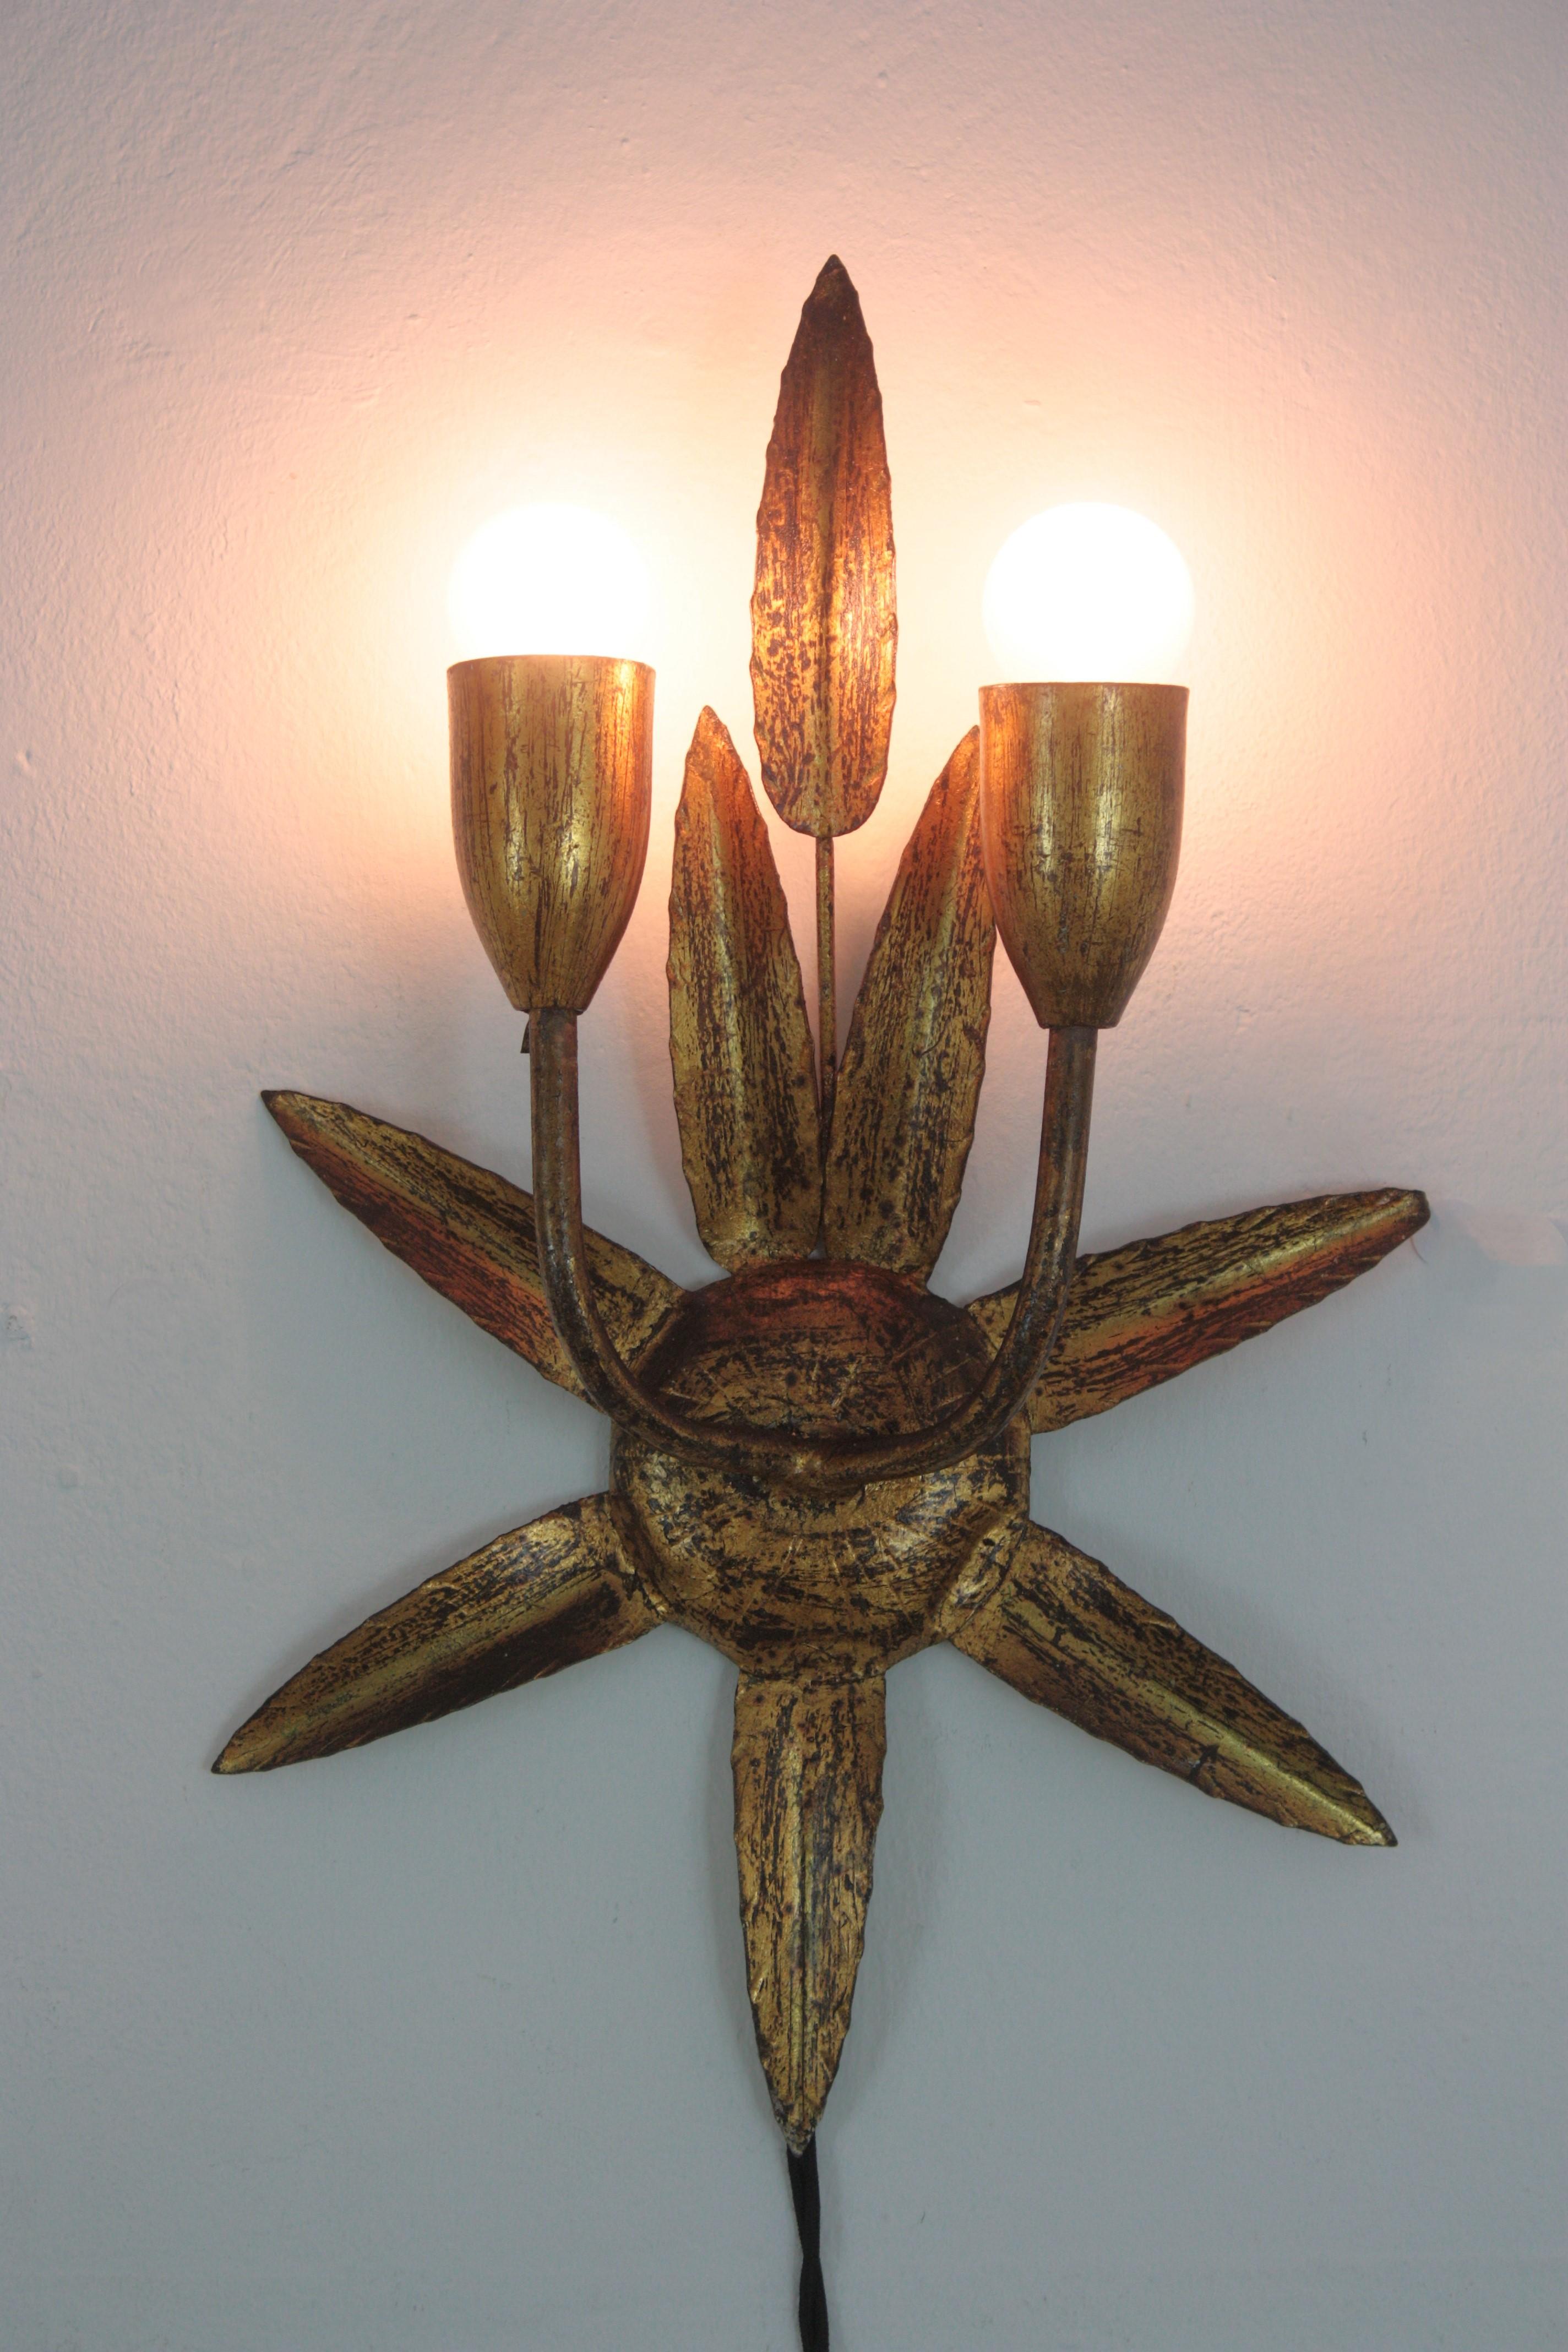 Spanish Gilt Iron Wall Sconce with Foliage Design and Starburst Backplate, 1950s For Sale 3